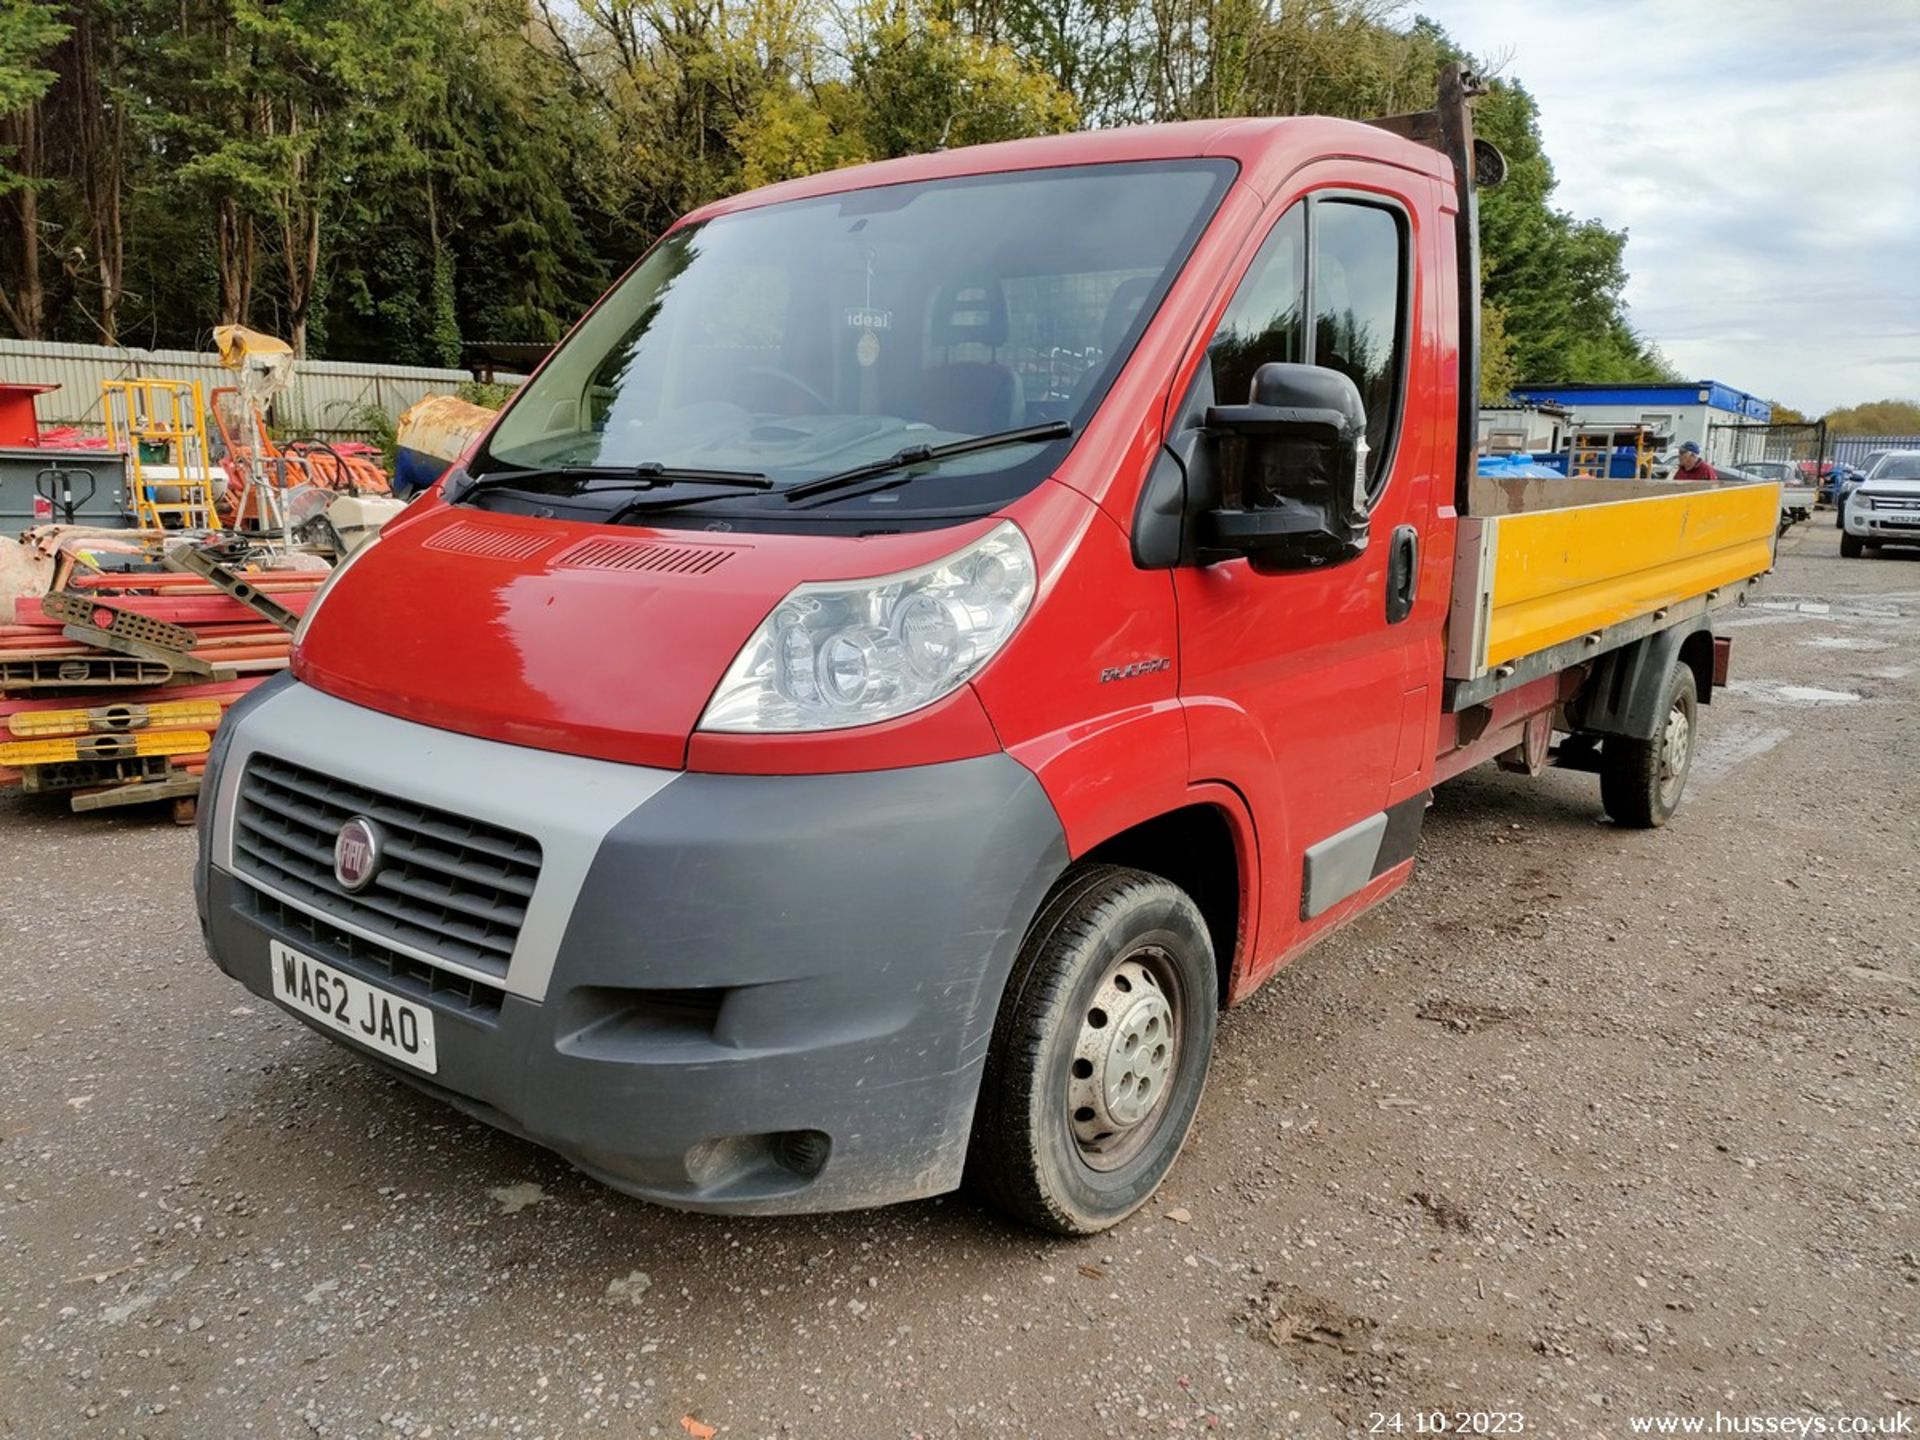 12/62 FIAT DUCATO 35 MULTIJET - 2287cc 2dr Flat Bed (Red, 134k) - Image 8 of 29